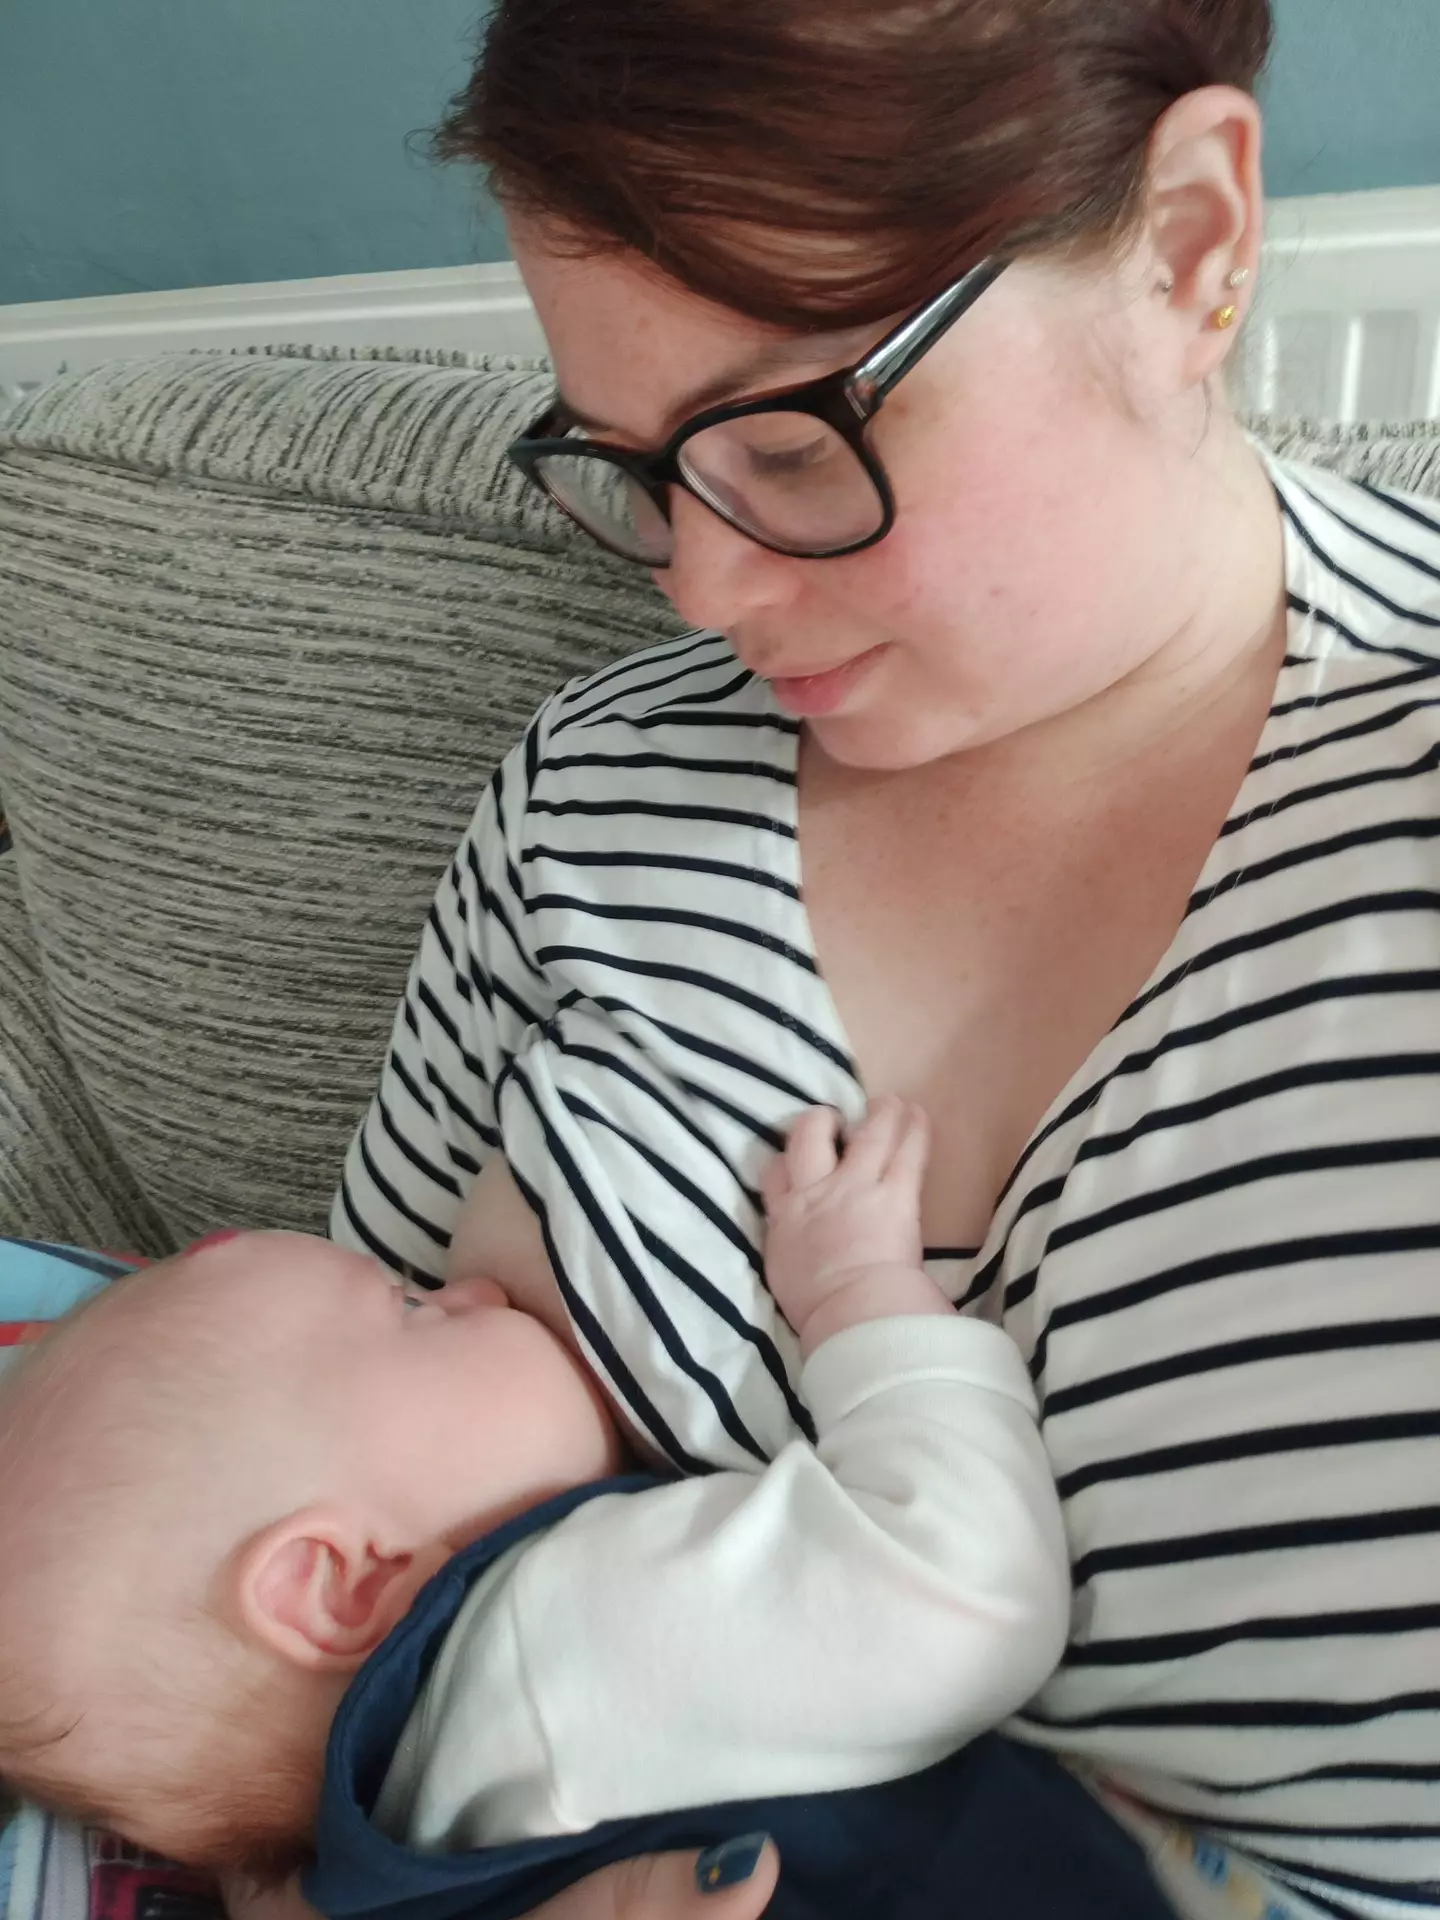 A new mum-of-one says she was told that she 'embarrassed' a group of cricketers after breastfeeding at a match.